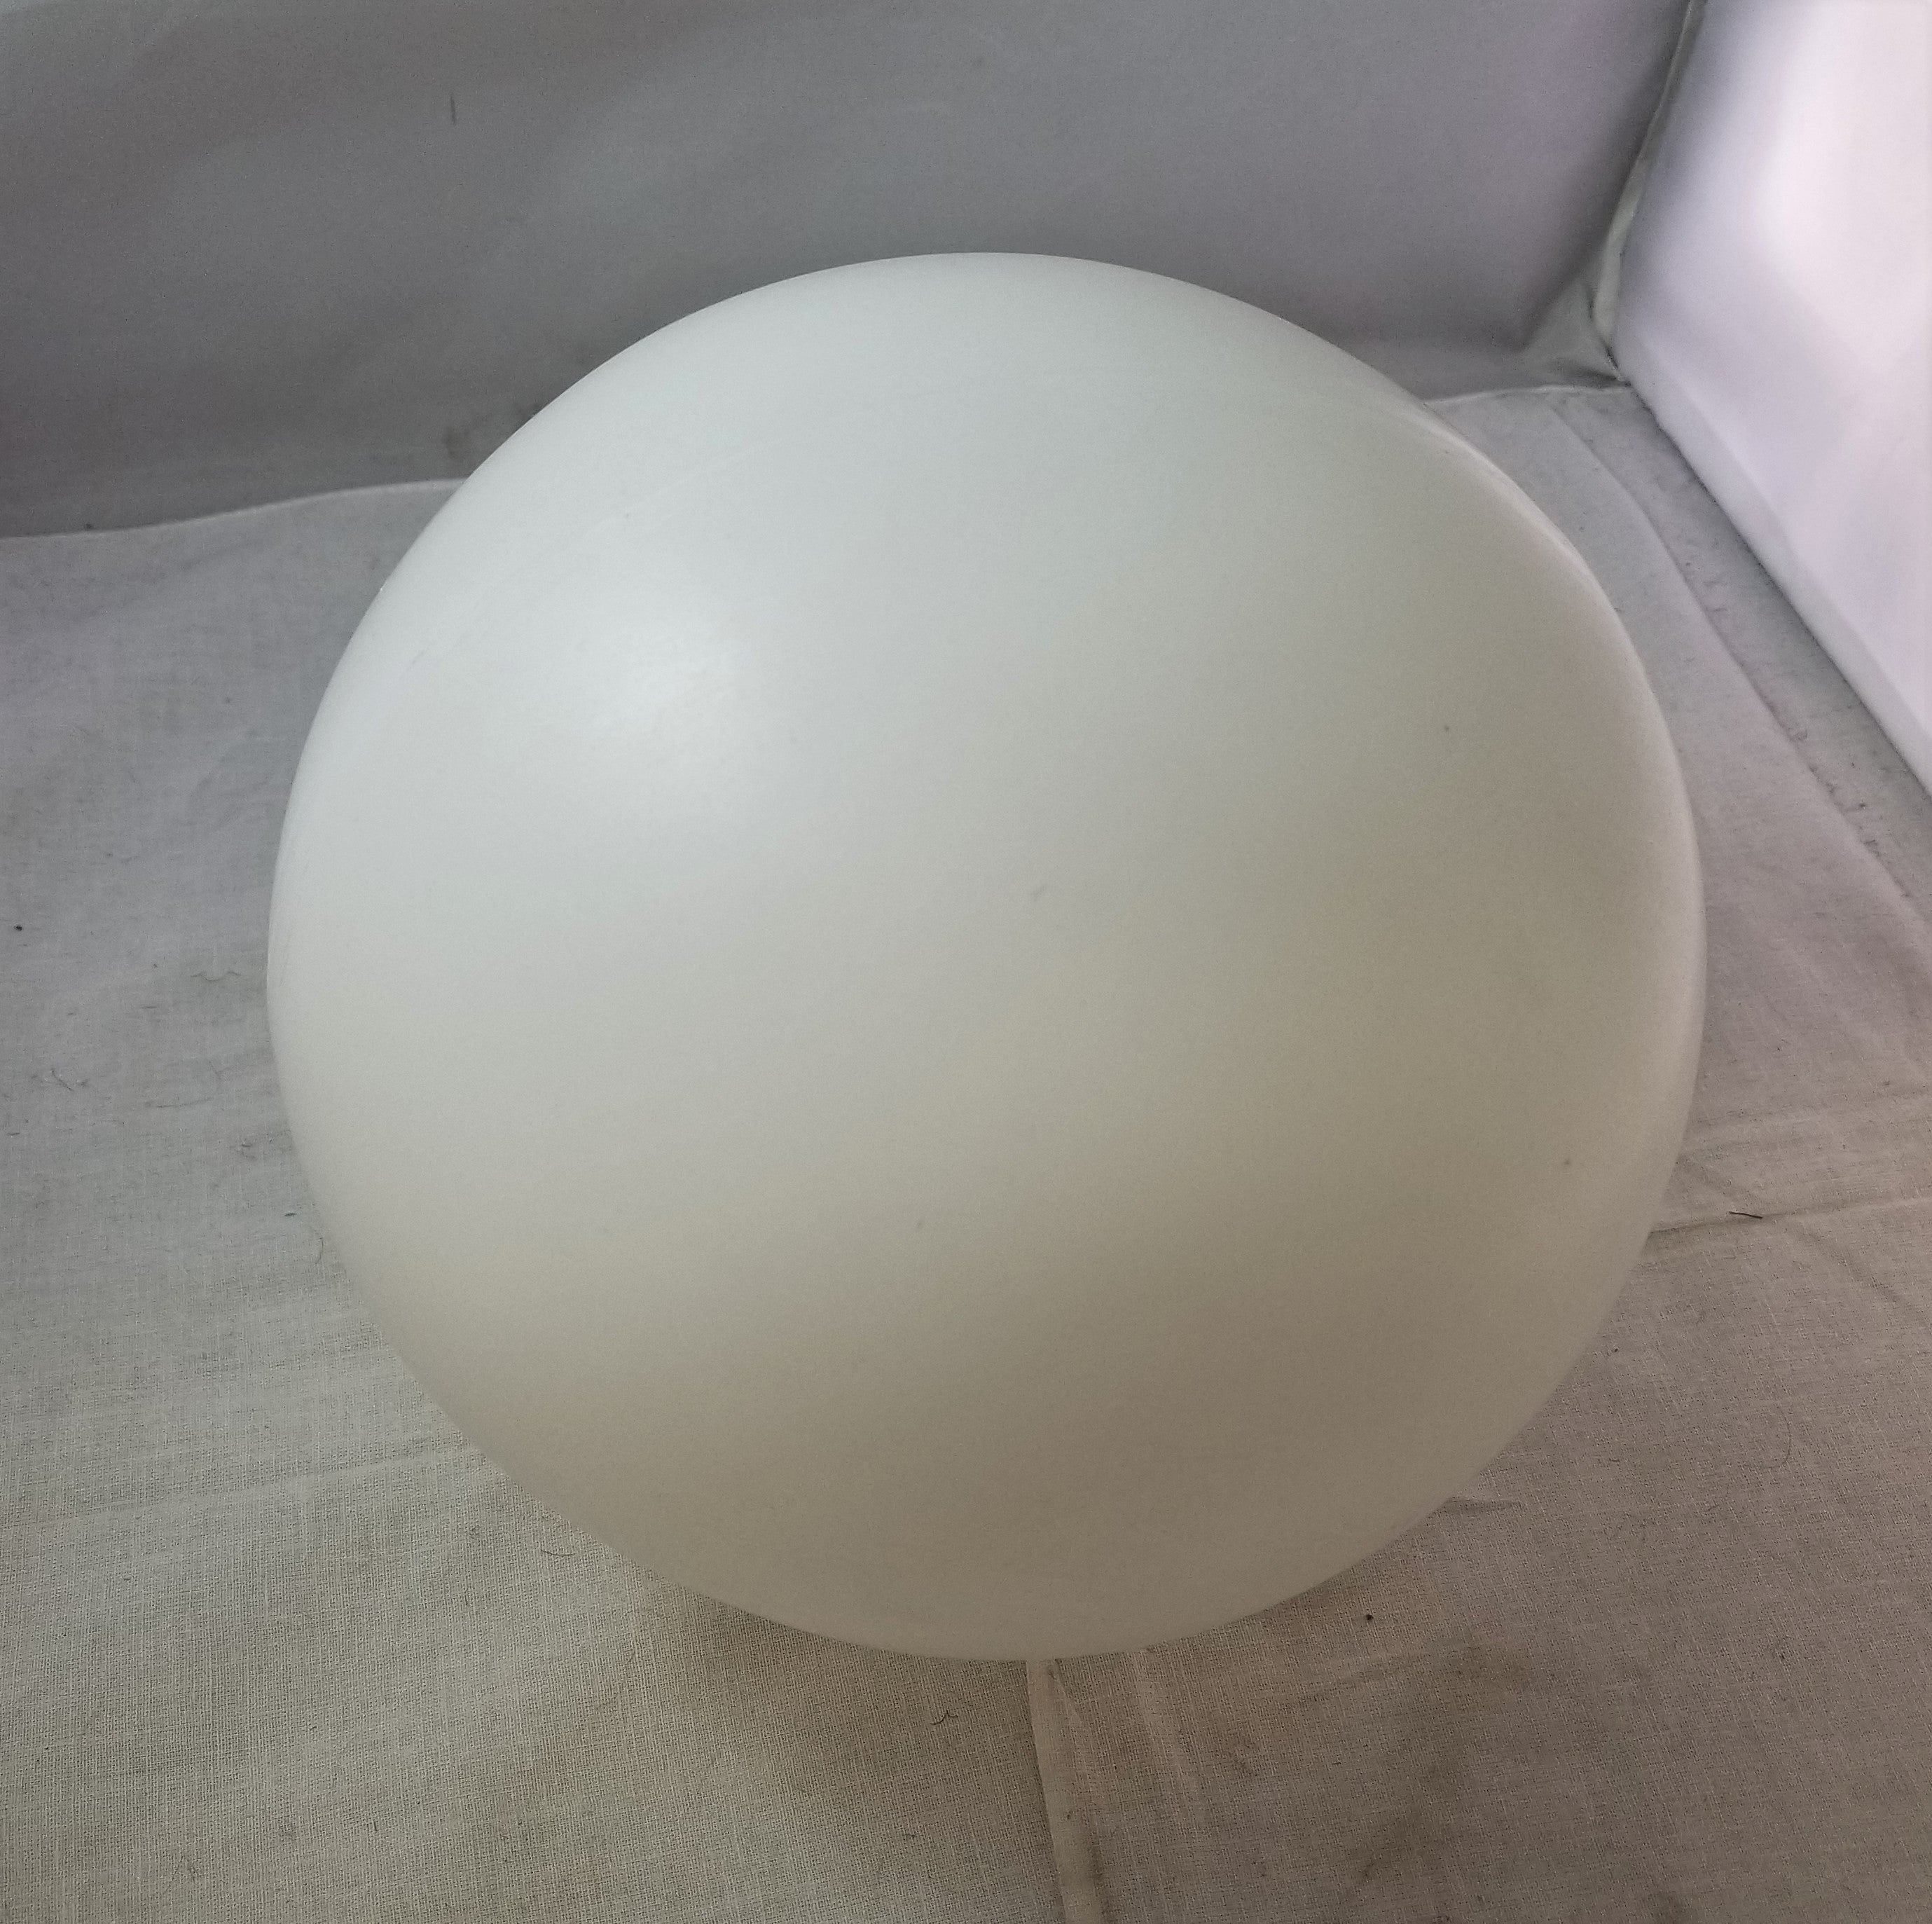 12" Plastic Globe with a 4" fitter